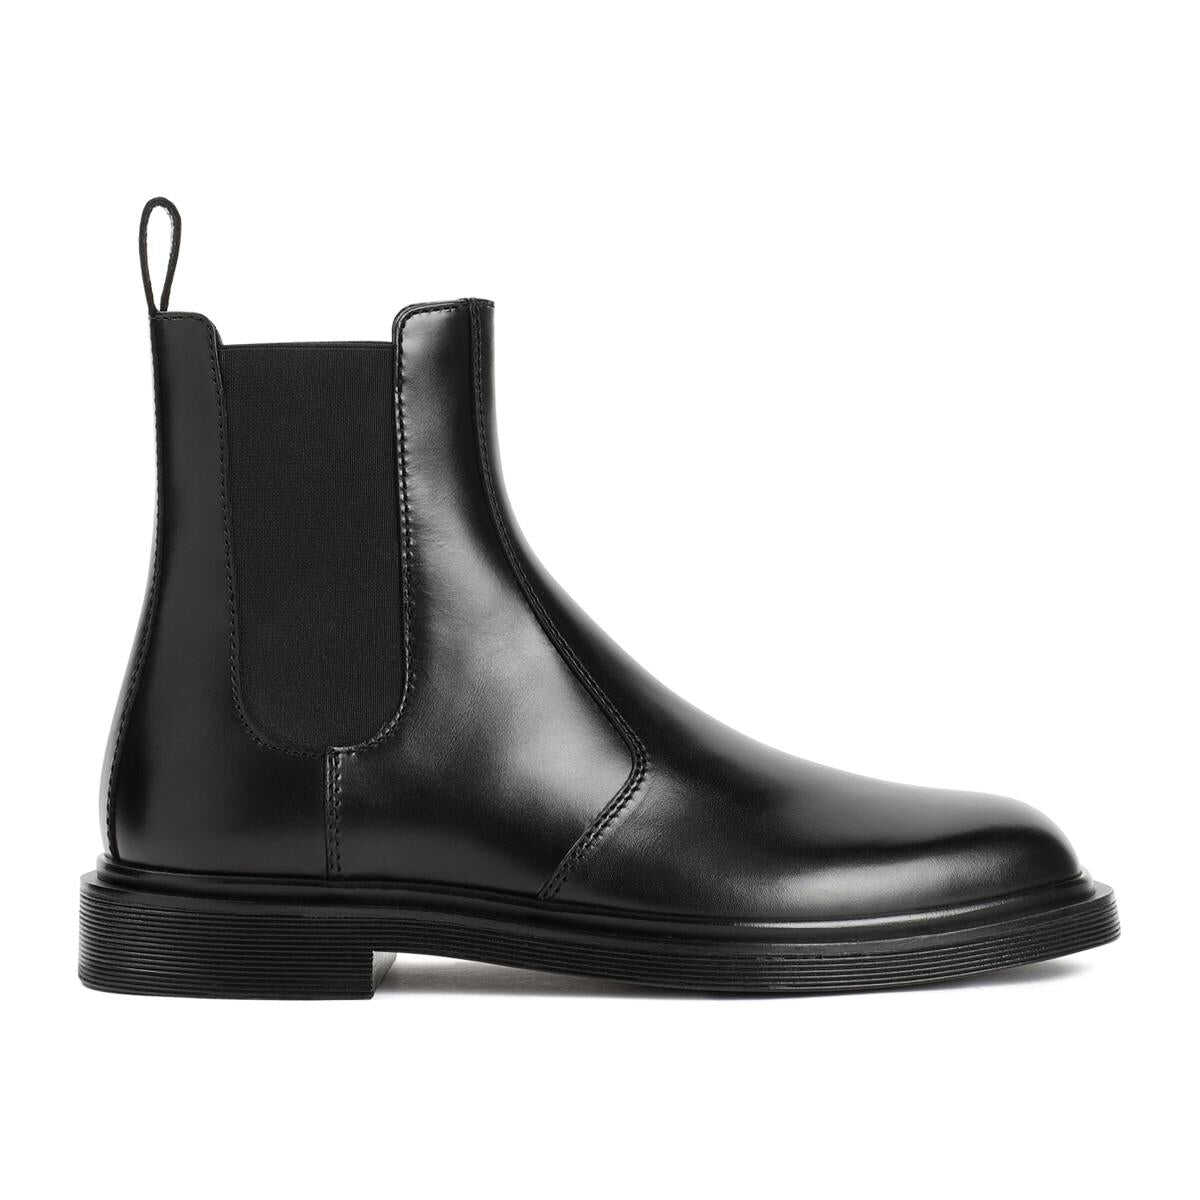 THE ROW THE ROW ELASTIC RANGER BOOTS SHOES BLACK